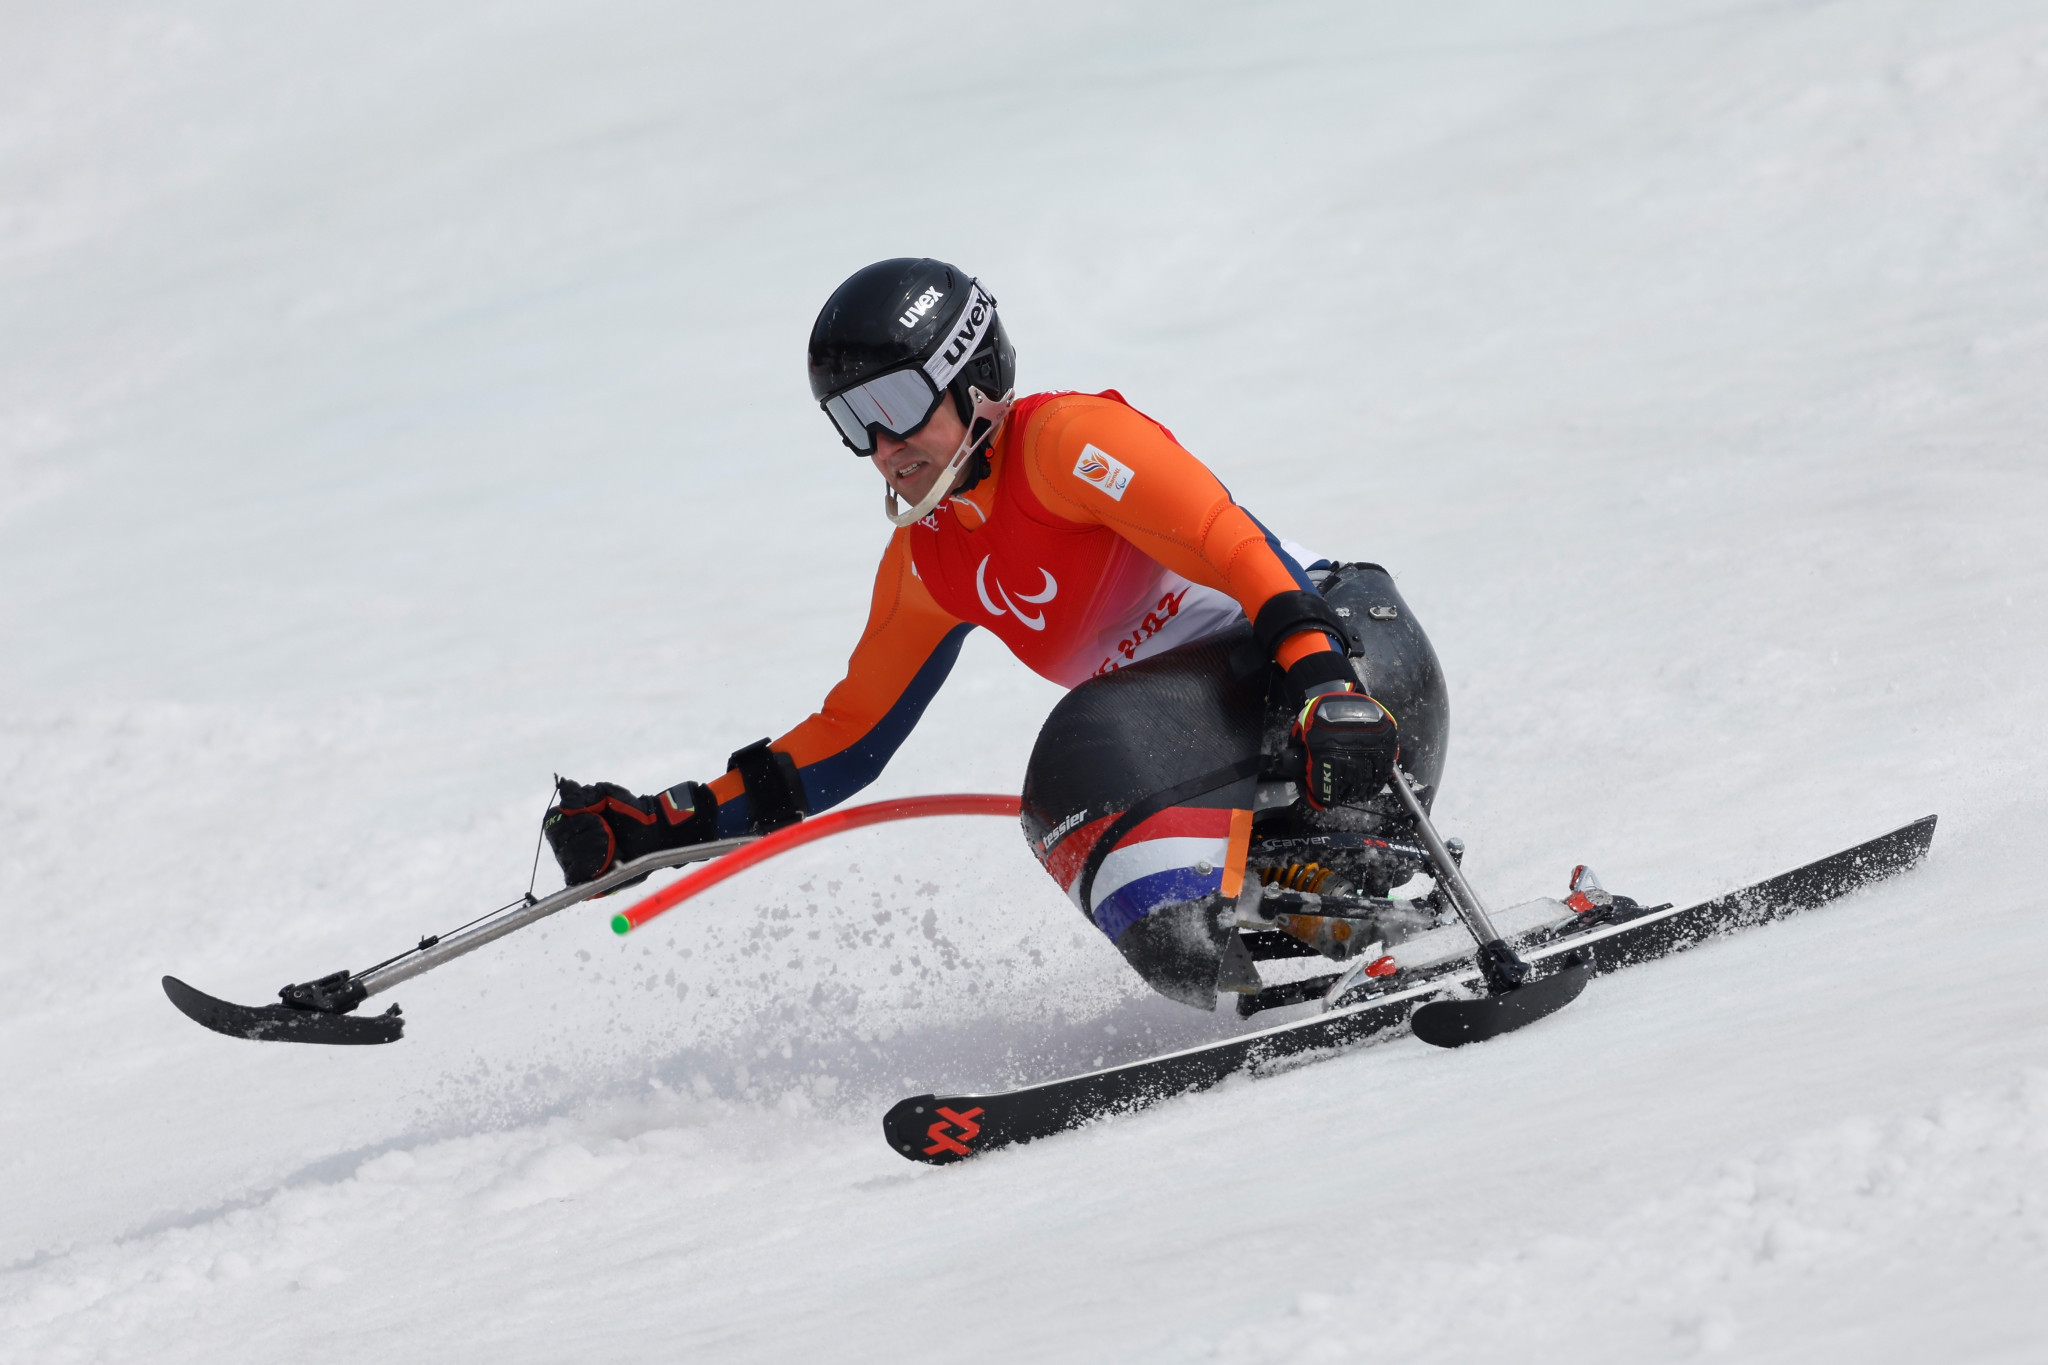 Niels de Langen won The Netherlands' fourth medal of the Paralympics with a silver in the Alpine skiing men's slalom sitting ©Getty Images